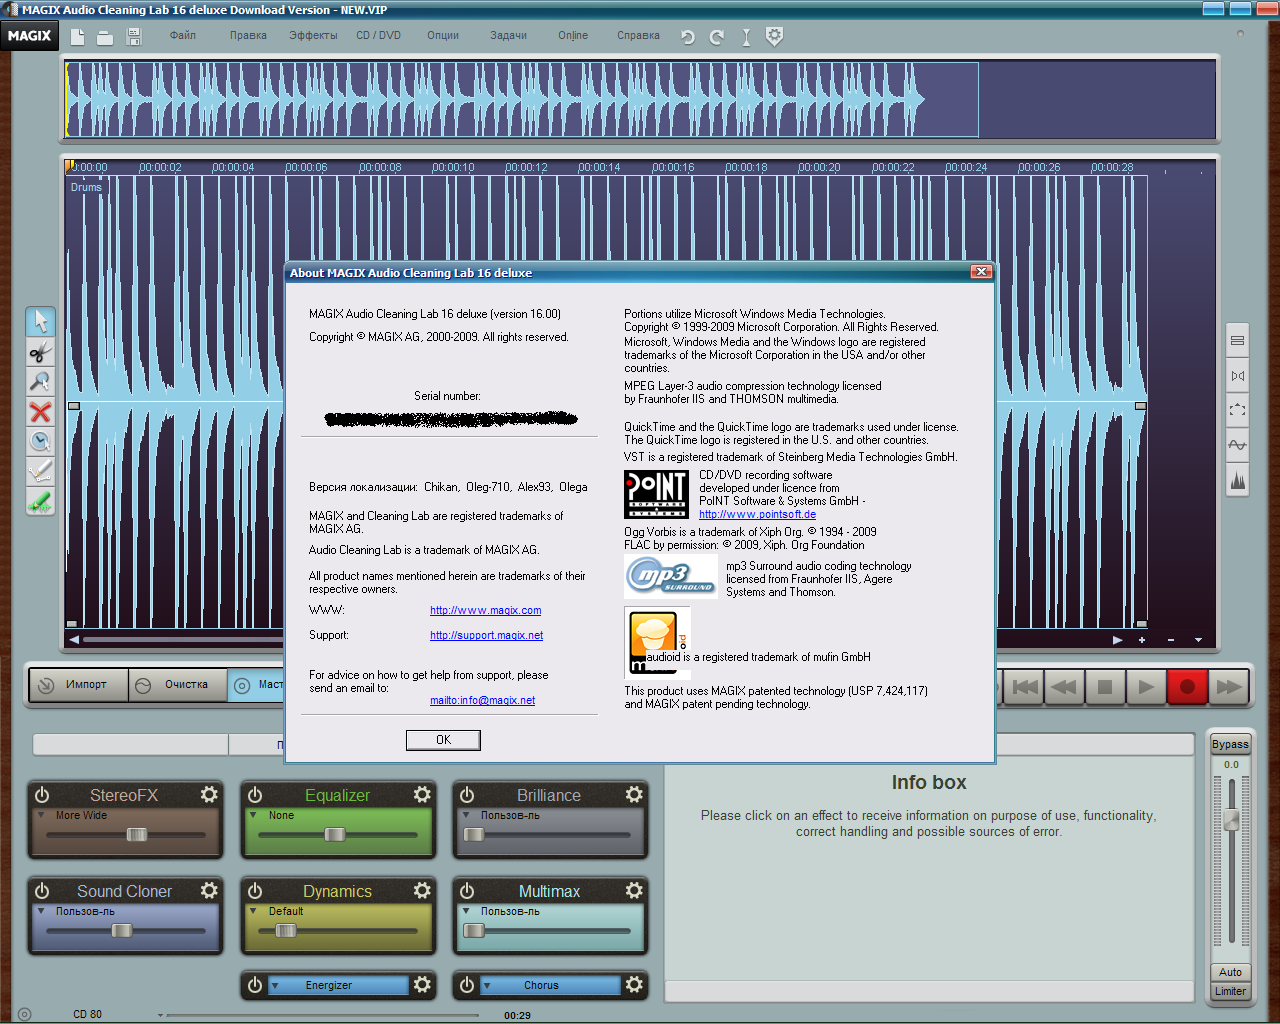 magix audio cleaning lab 16 deluxe v16.00